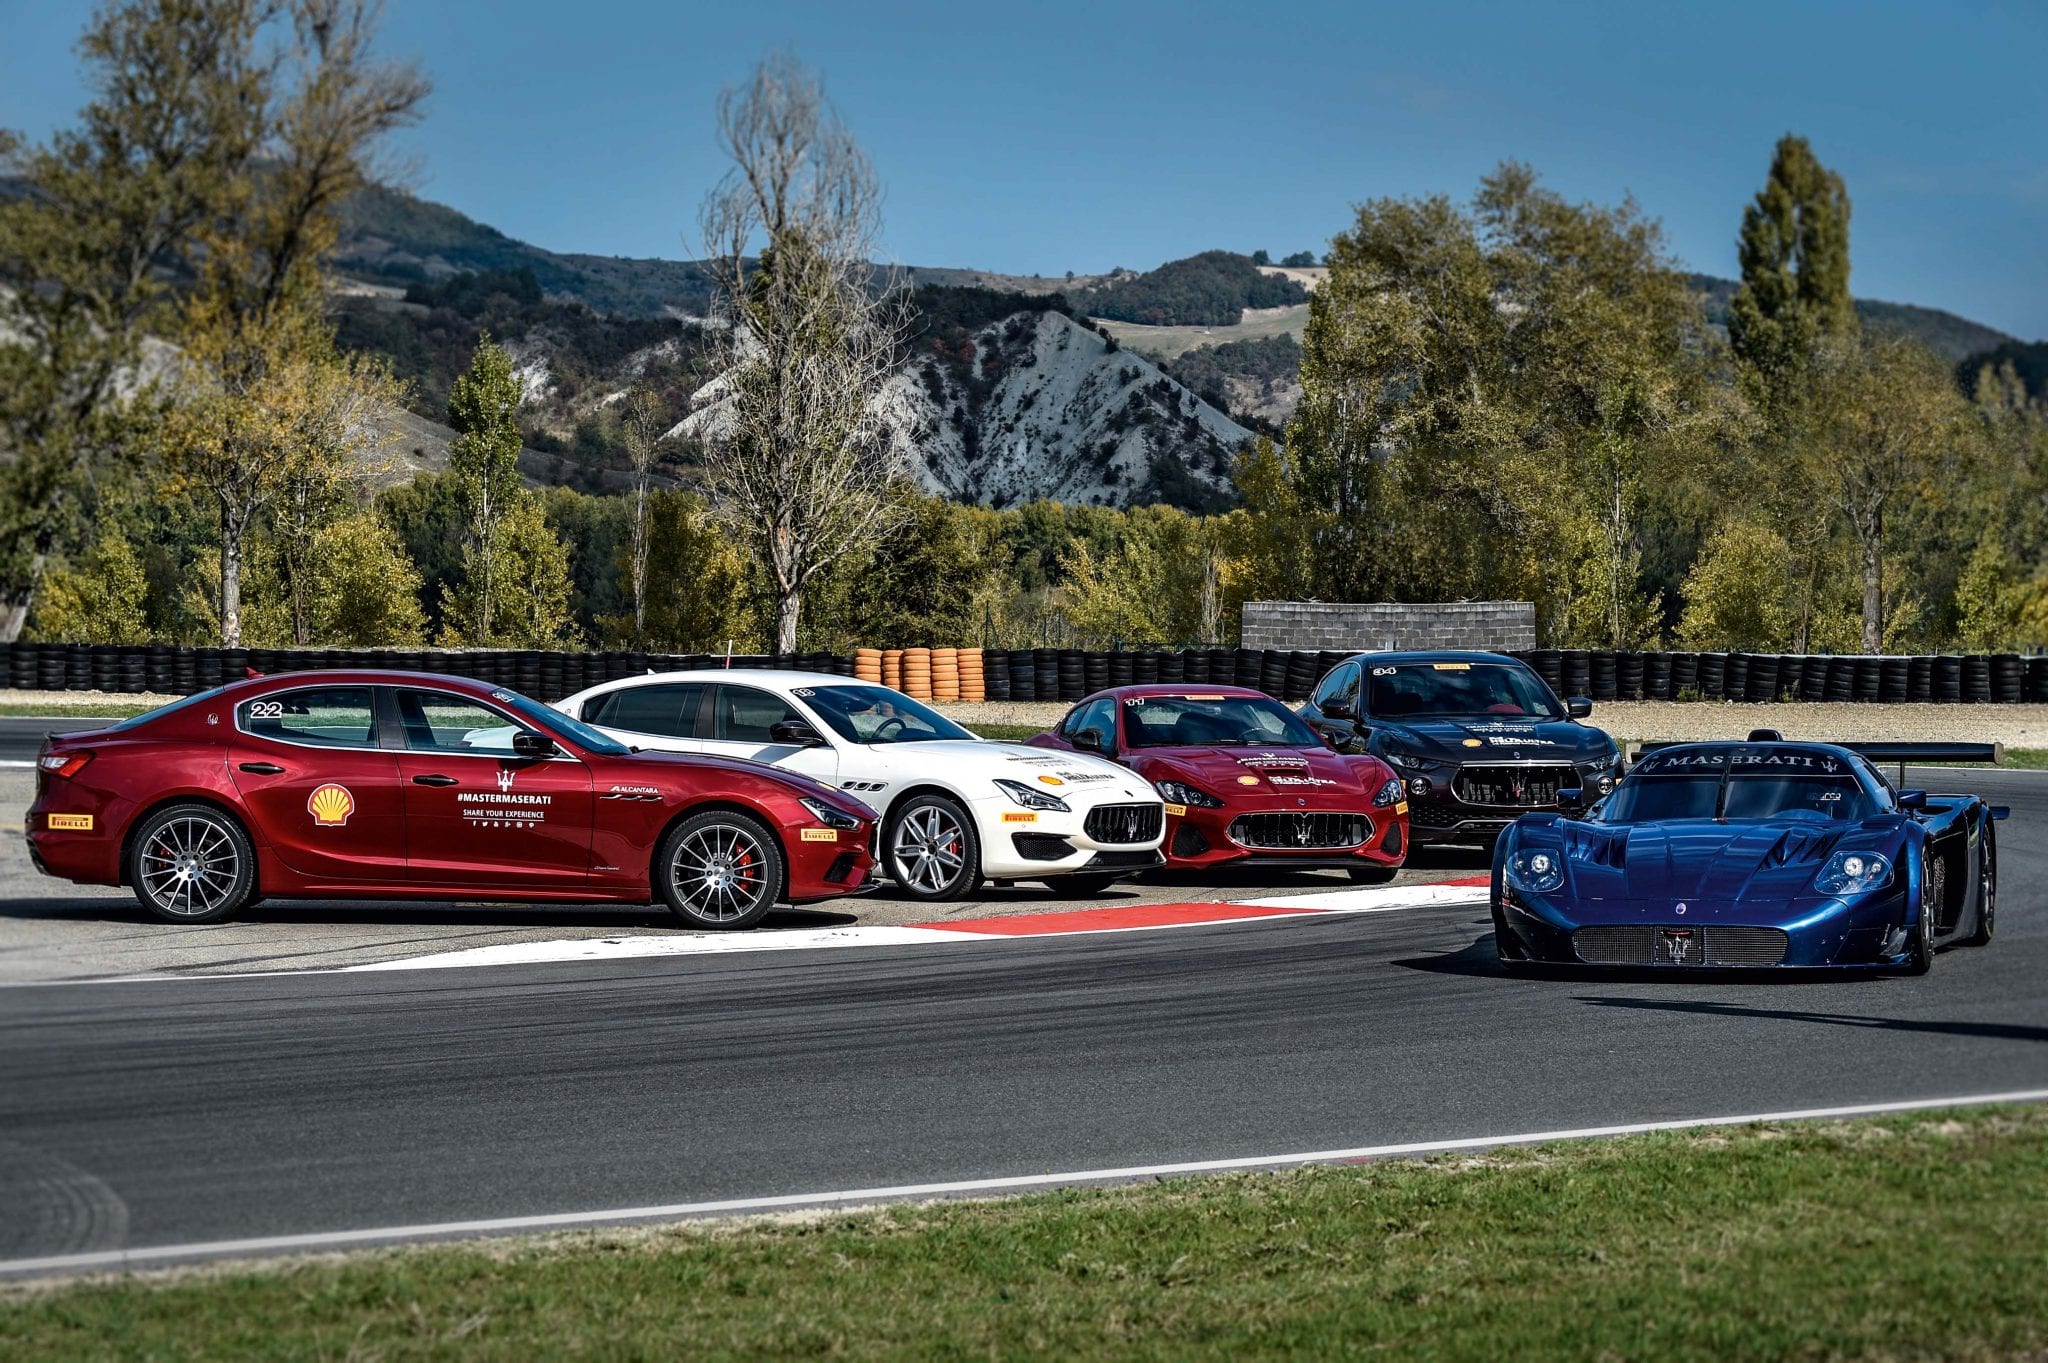 New Master Maserati driving courses for 2018